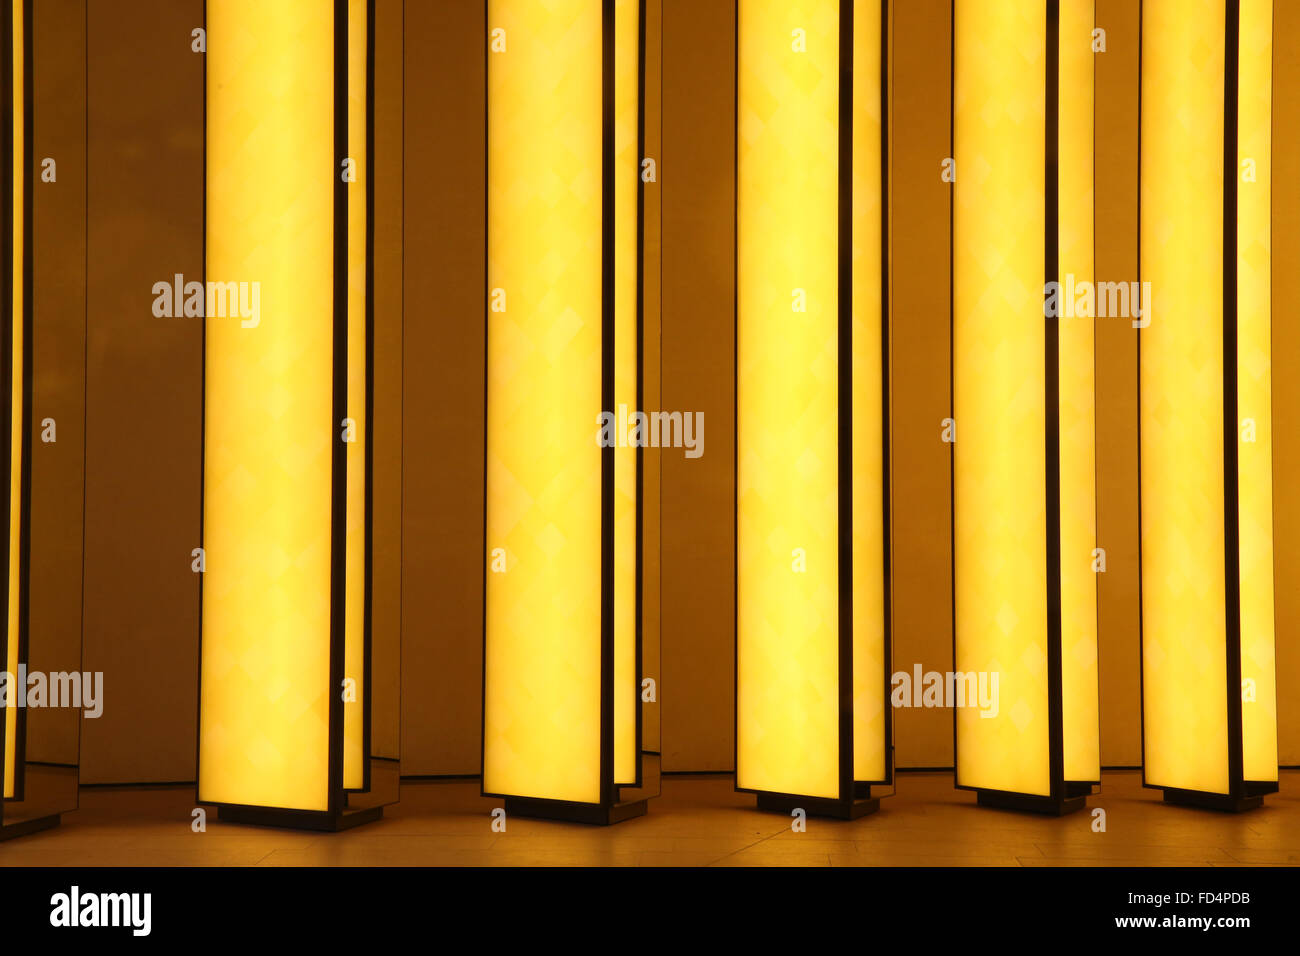 Louis vuitton neon sign hi-res stock photography and images - Alamy